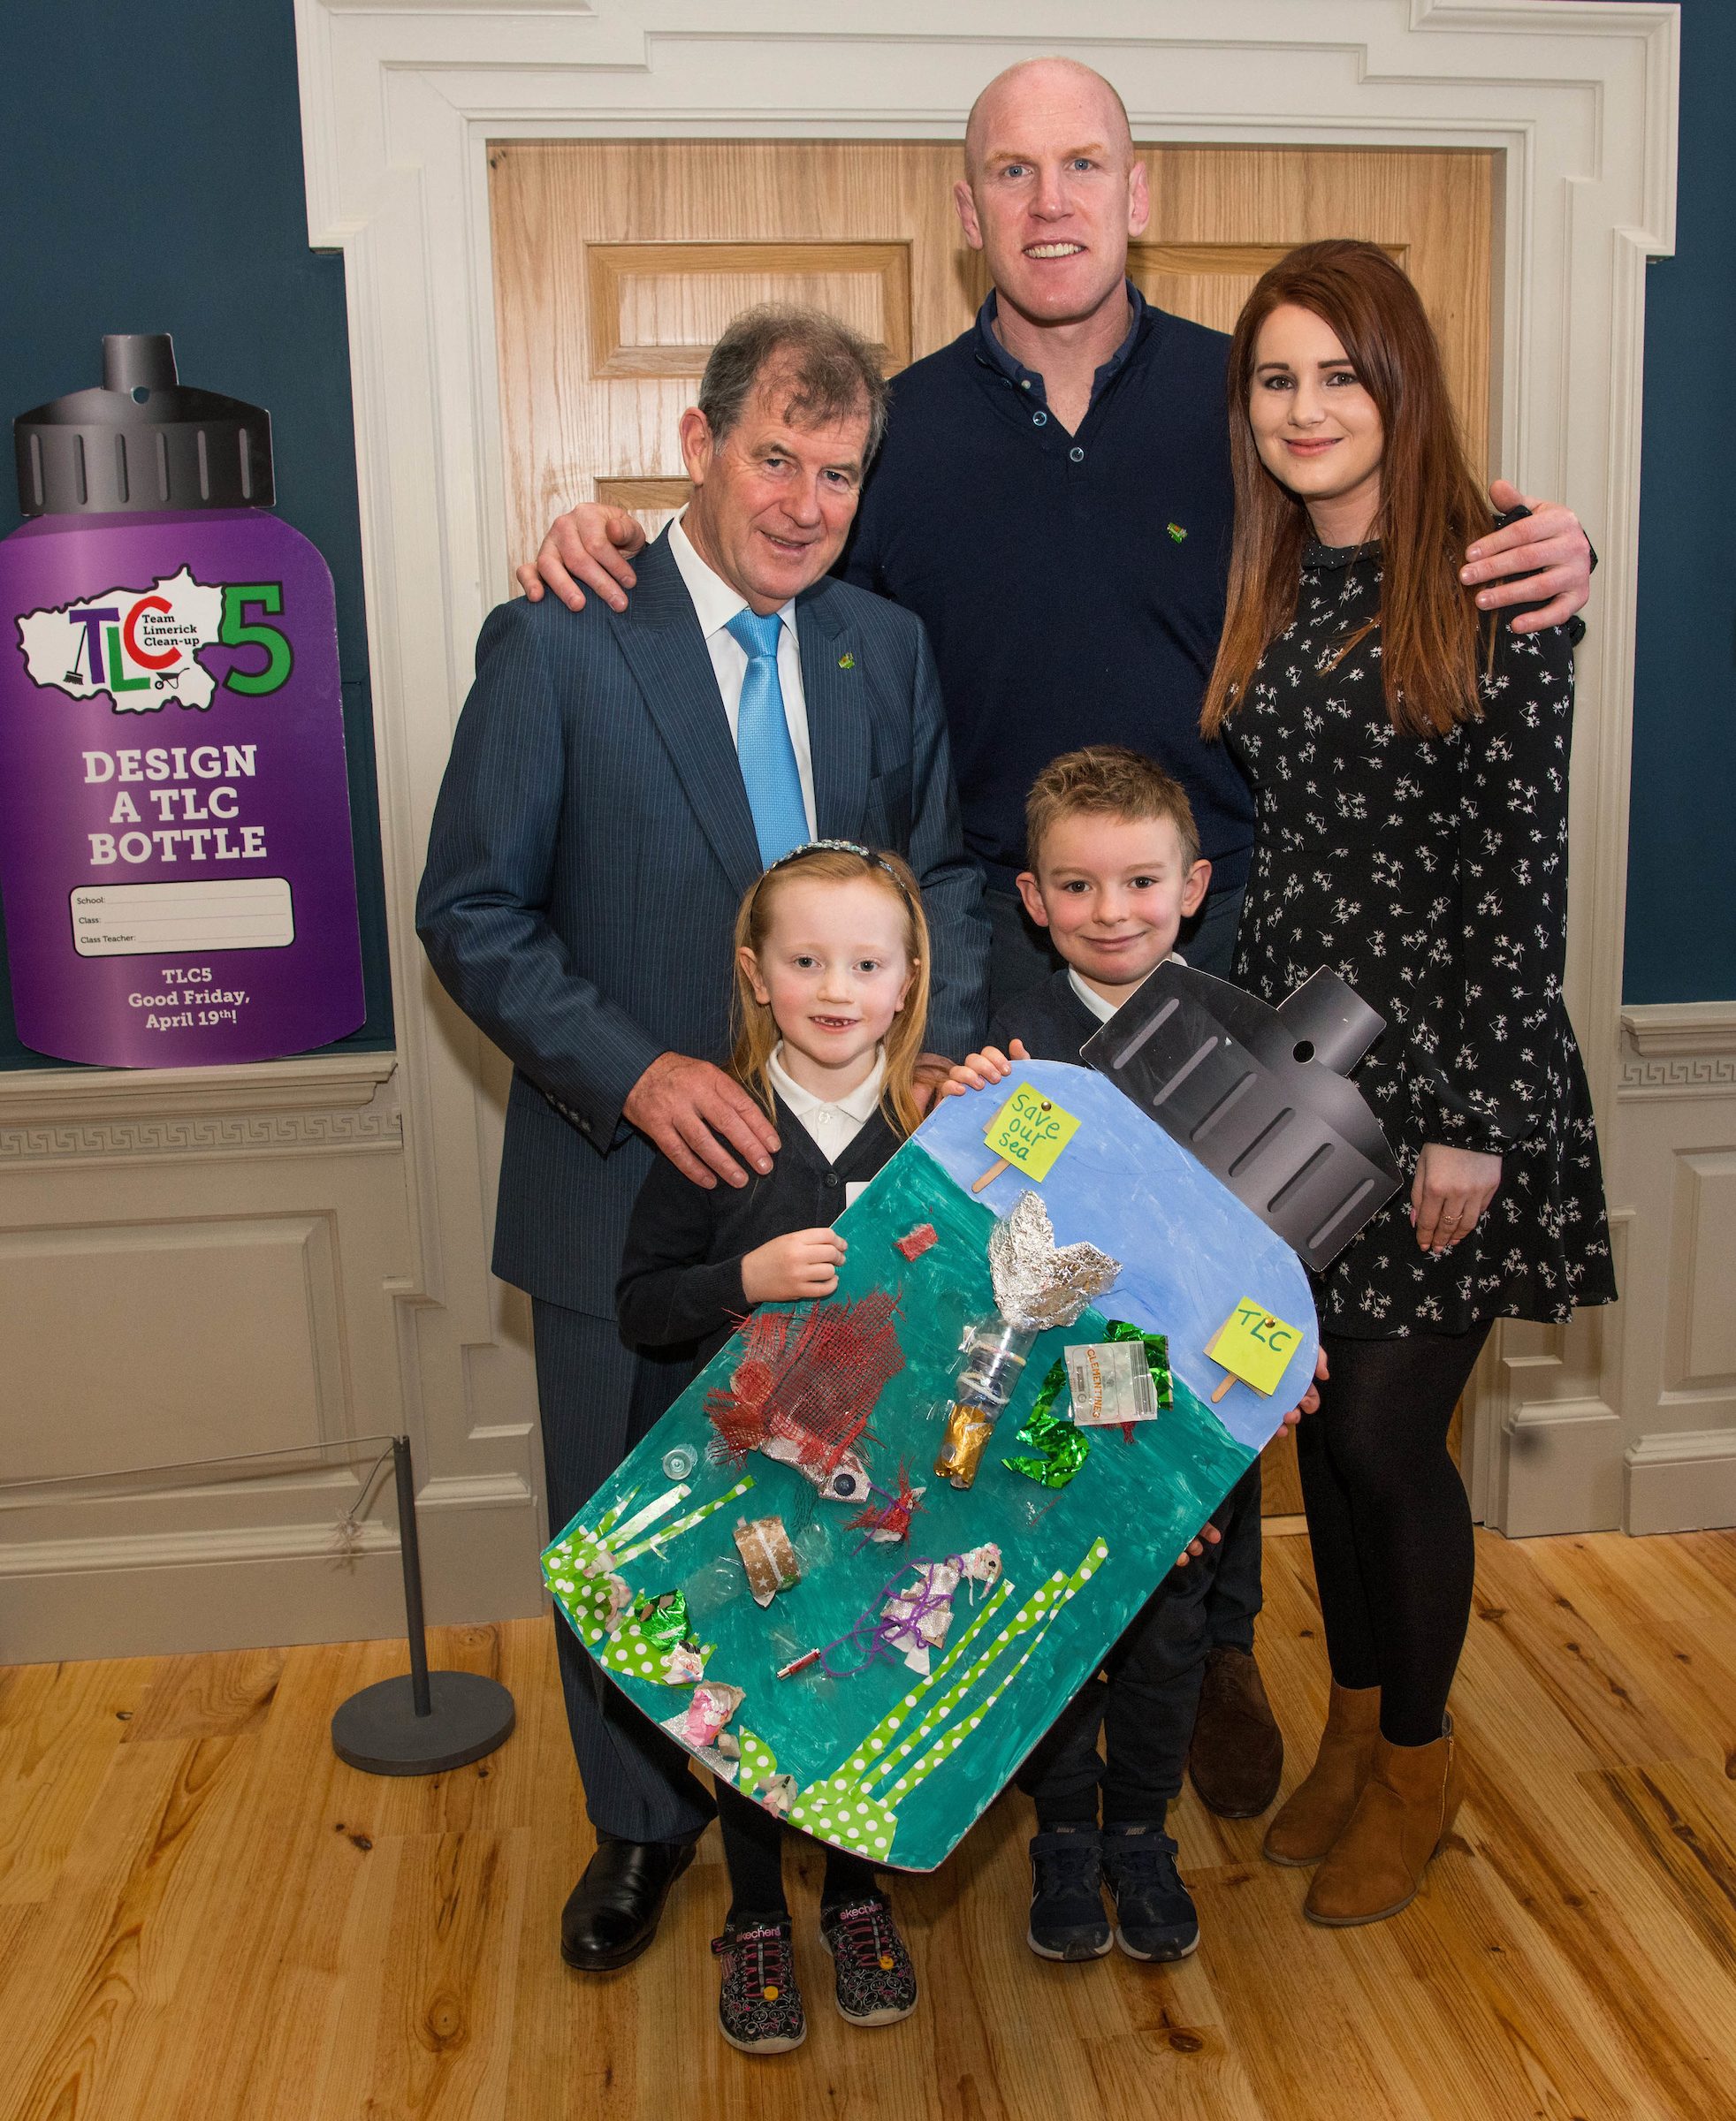 07/03/20192nd place winners of the junior infants-2nd class category are students Carla O'Brien, senior infants, and Eli O'Sullvian, 1st class, from Bulgaden NS along with teacher Charlotte Reidy, JP McManus and Paul O'Connell at the 'Design a TLC Bottle' prizegiving at the Hunt Museum, Limerick. Over 50 primary schools across the county entered ahead of Team Limerick Clean-Up 5, which will see thousands of volunteers take to the streets of Limerick city and county for Europe's largest one-day clean up. Sponsored by the JP McManus Benevolent Fund, the event has seen over 360 tonnes of litter gathered from the streets since inception in 2015. Over 14,000 volunteers have already signed up for the 2019 event, taking place on Good Friday, 19th April. Photo by Diarmuid Greene